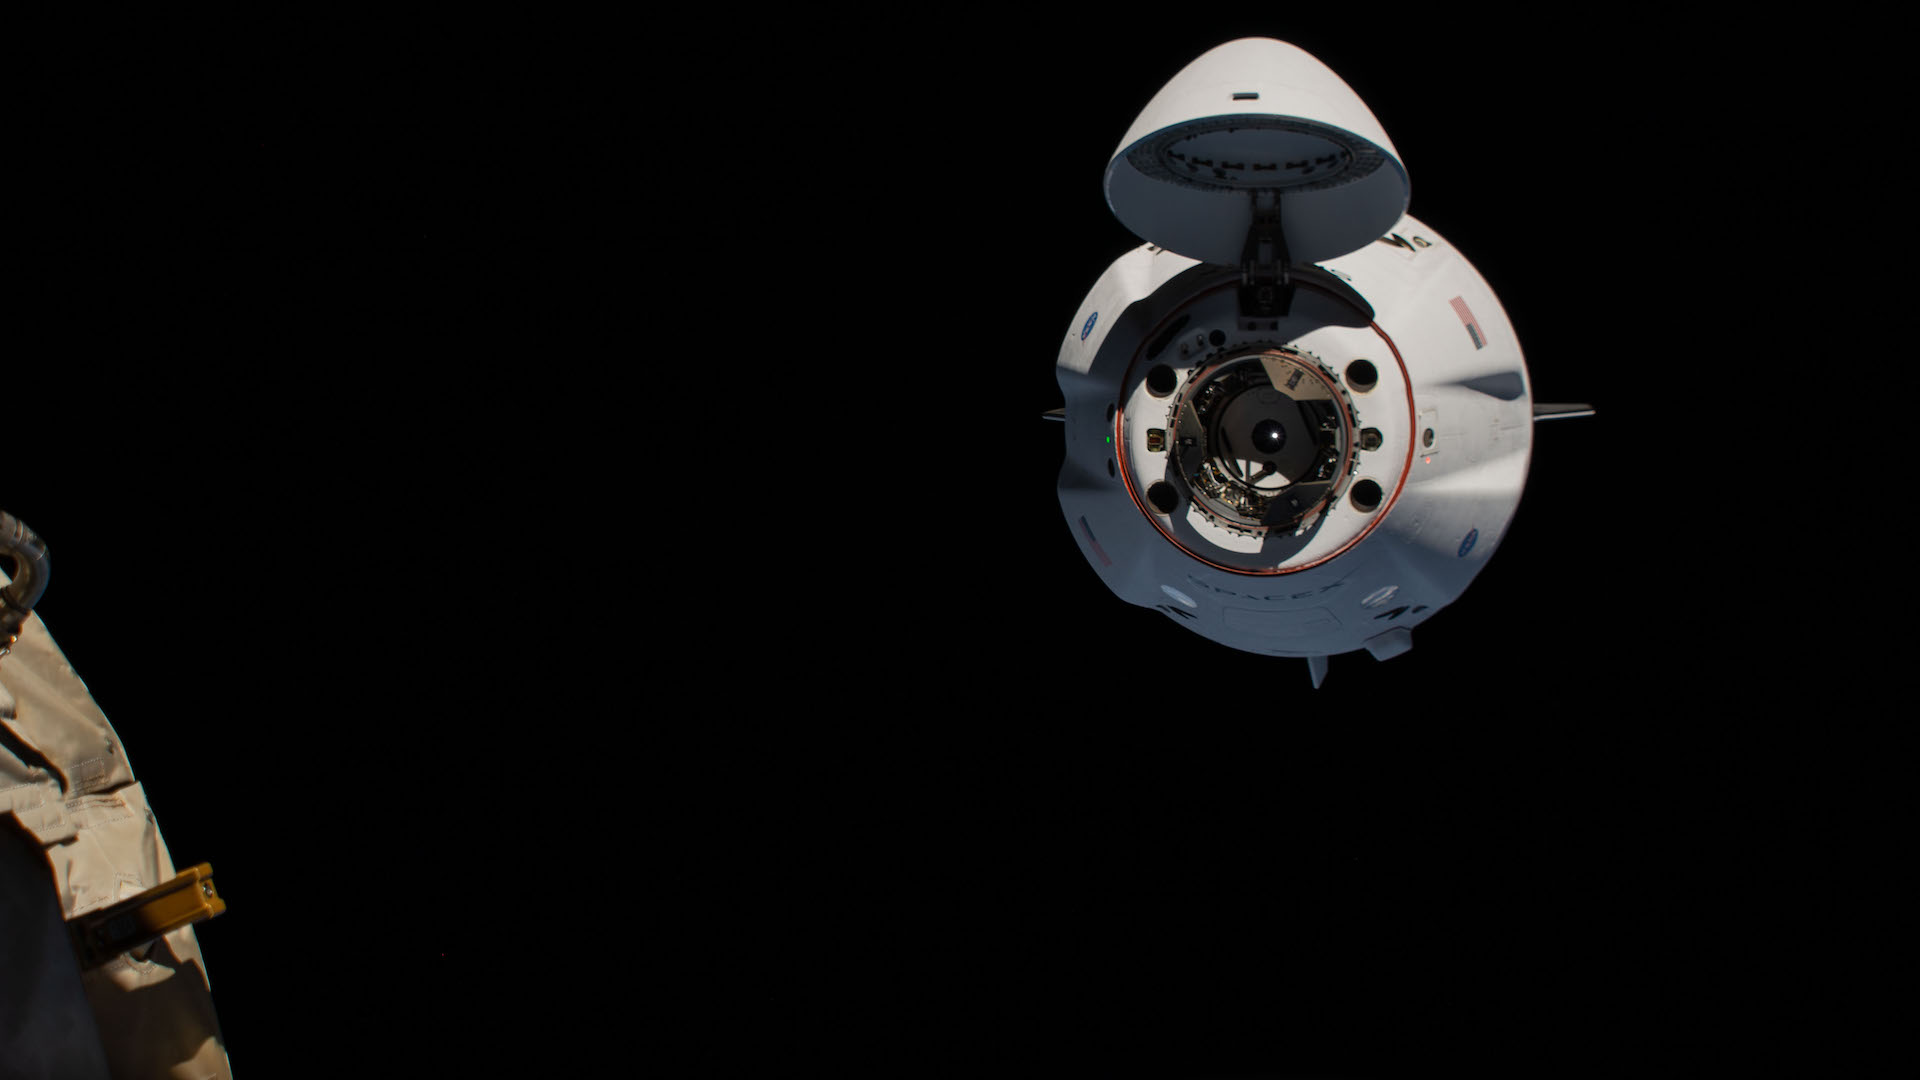 SpaceX Crew Dragon Approach